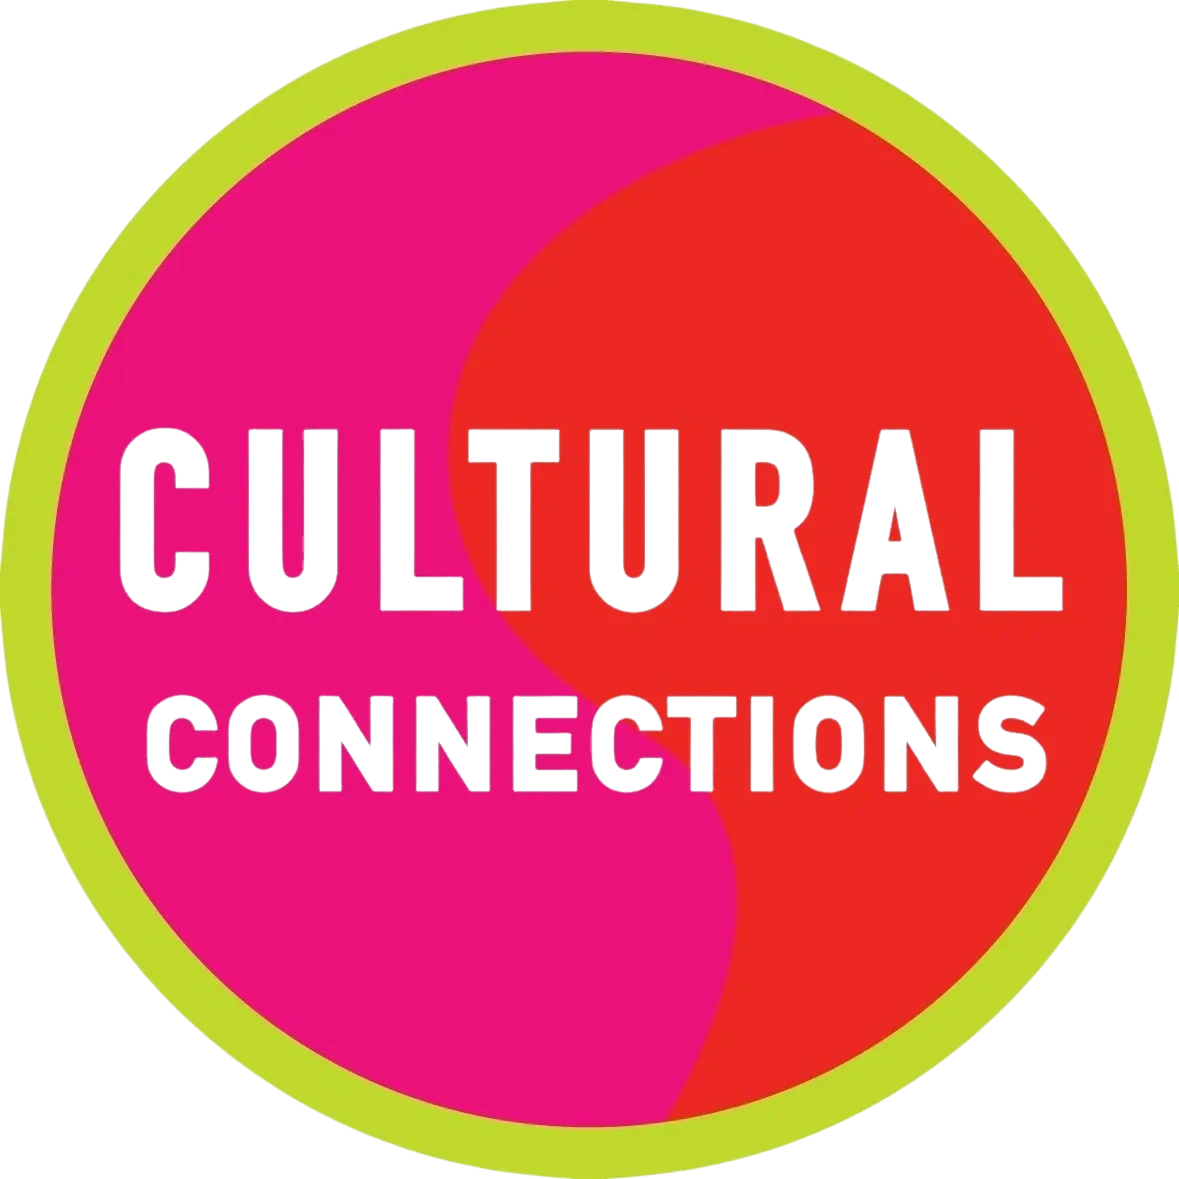 Your Cultural Connection